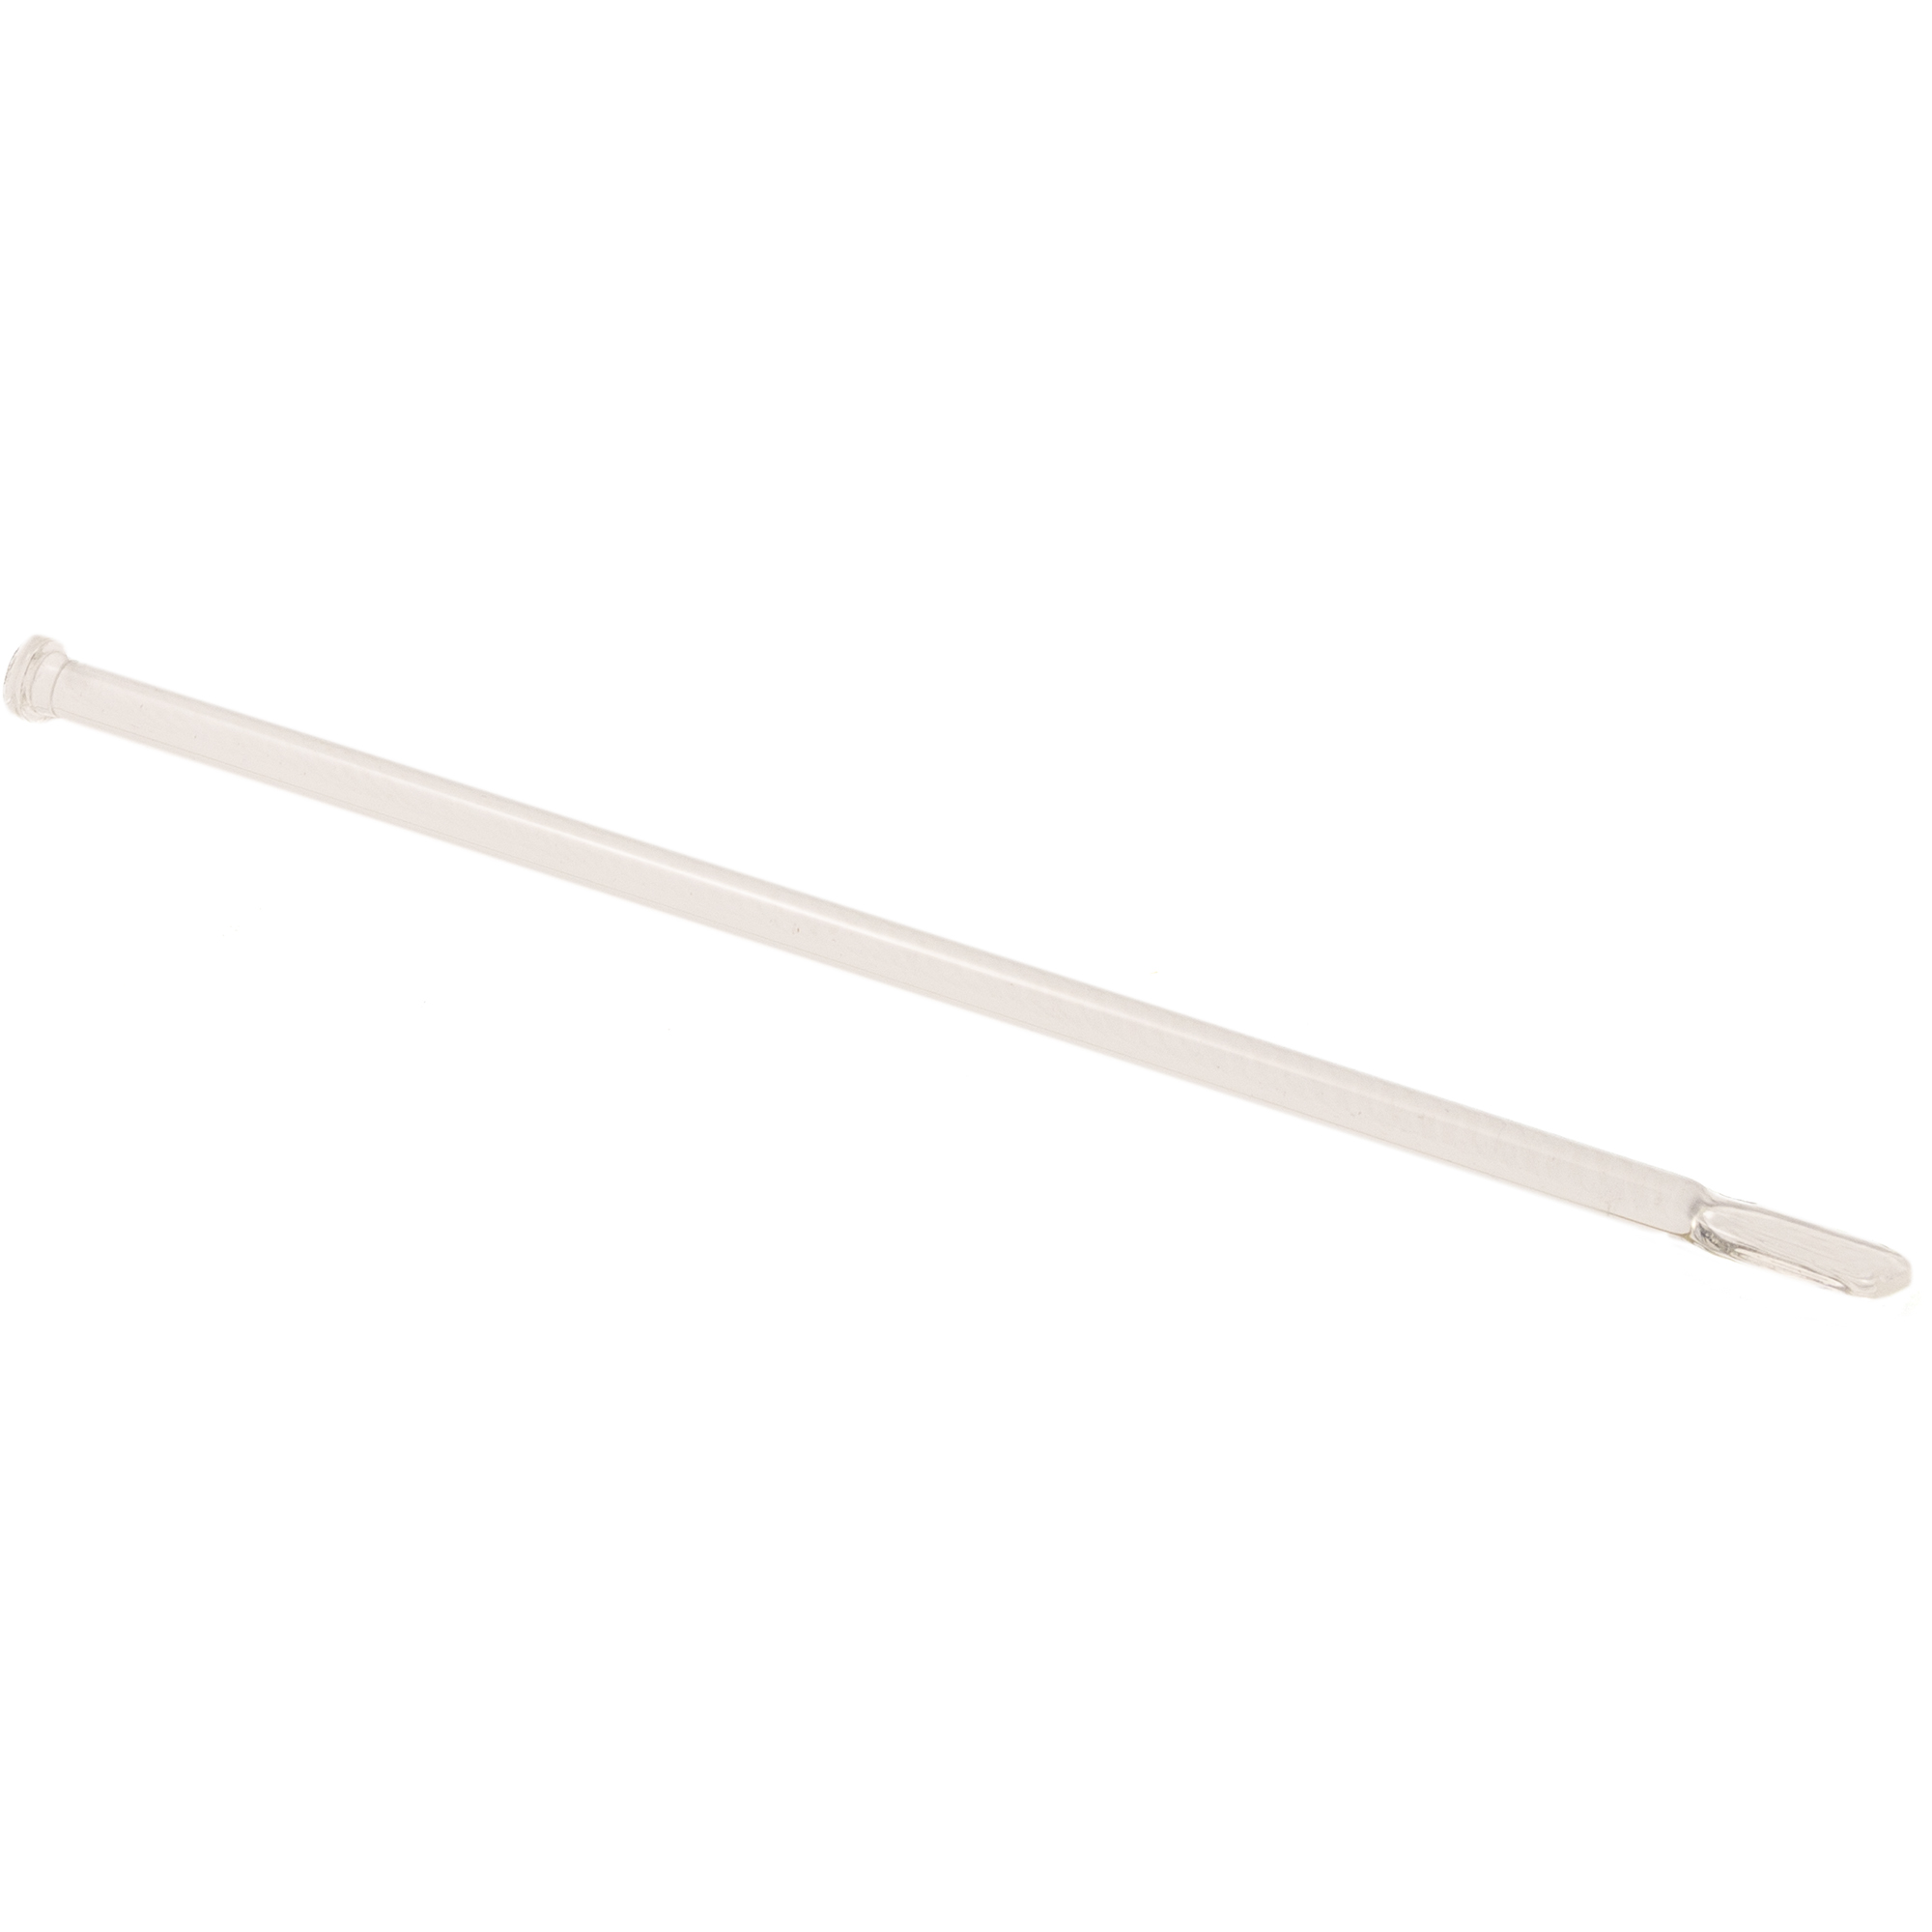 ABML 12958934 Stirring rod glass, double ended 6x200mm